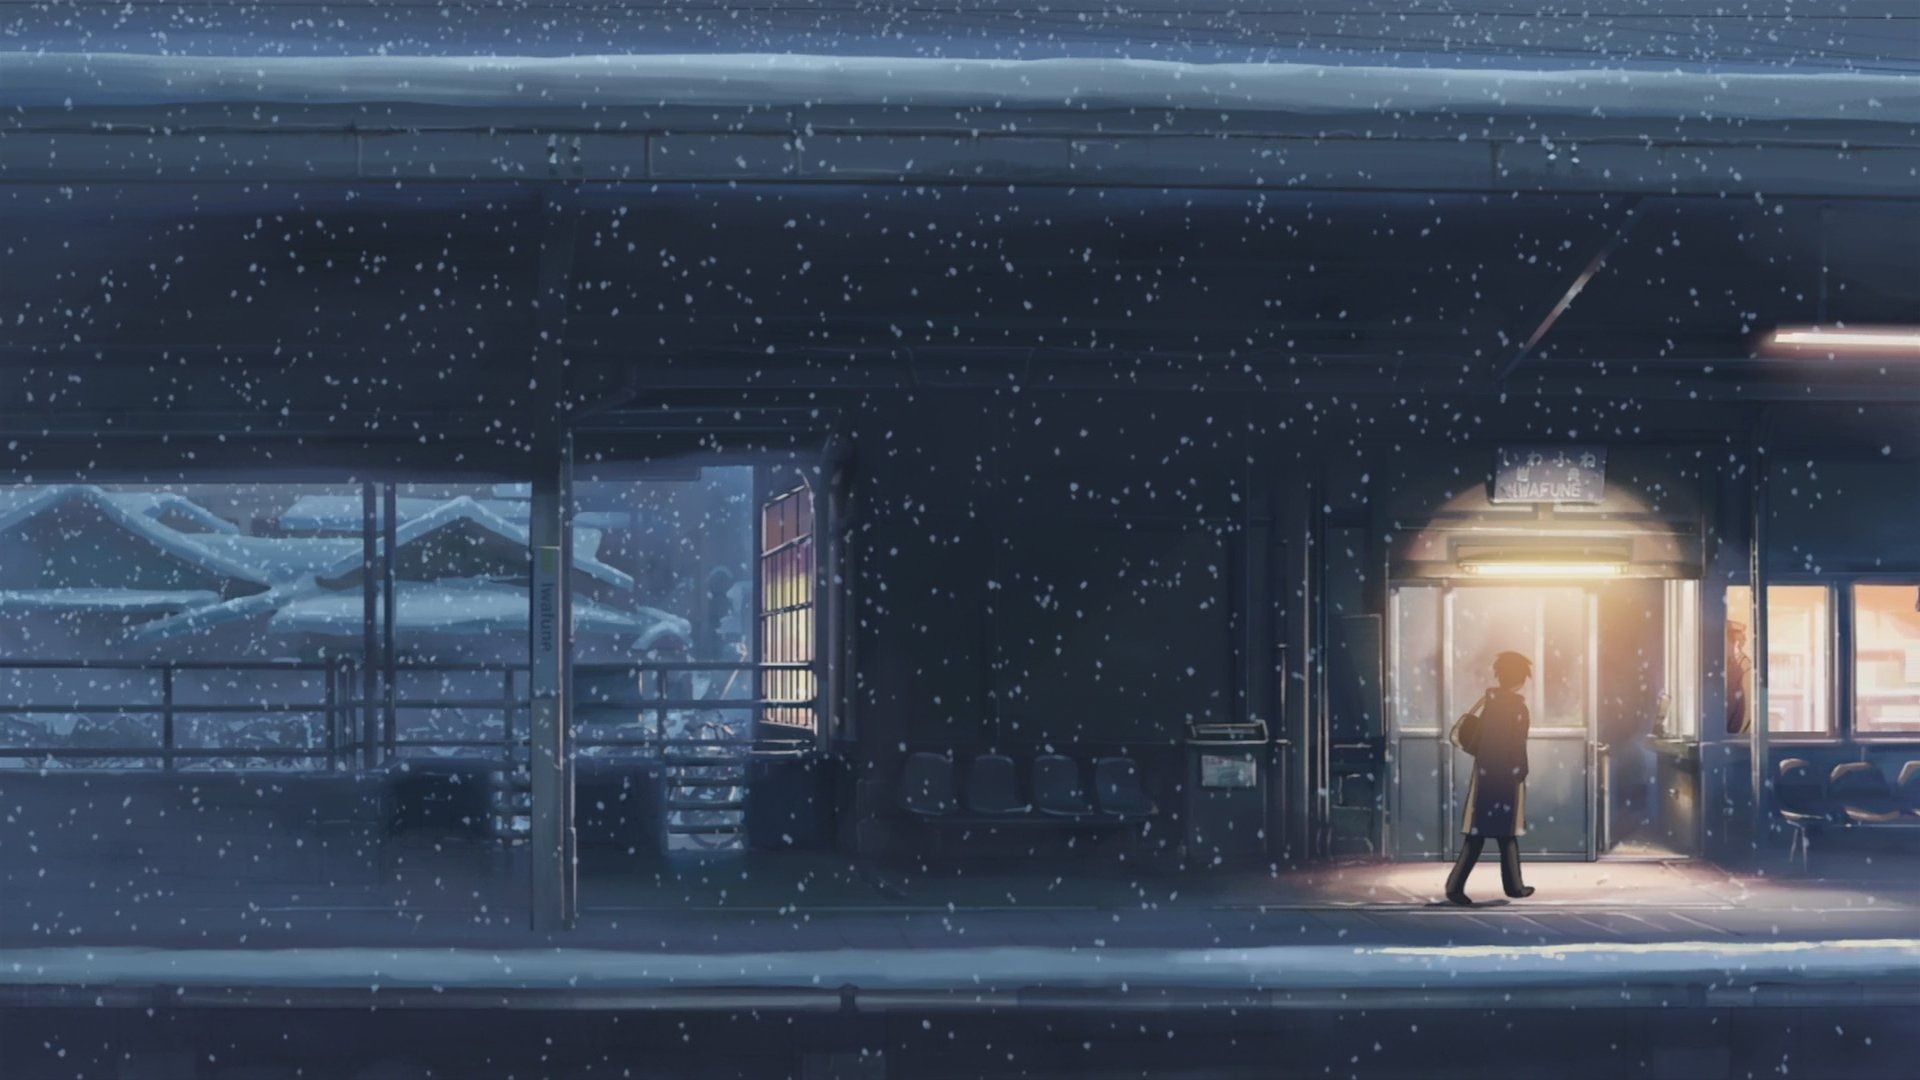 1920x1080 anime, 5 Centimeters Per Second, Scenery, Snow, Window, Night, Building, Car, People, Train, Snowing, 5 Centimeters Per Second Wallpapers HD / Desktop and Mobile Backgrounds - 90s anime, desktop, 1920x1080, anime, space